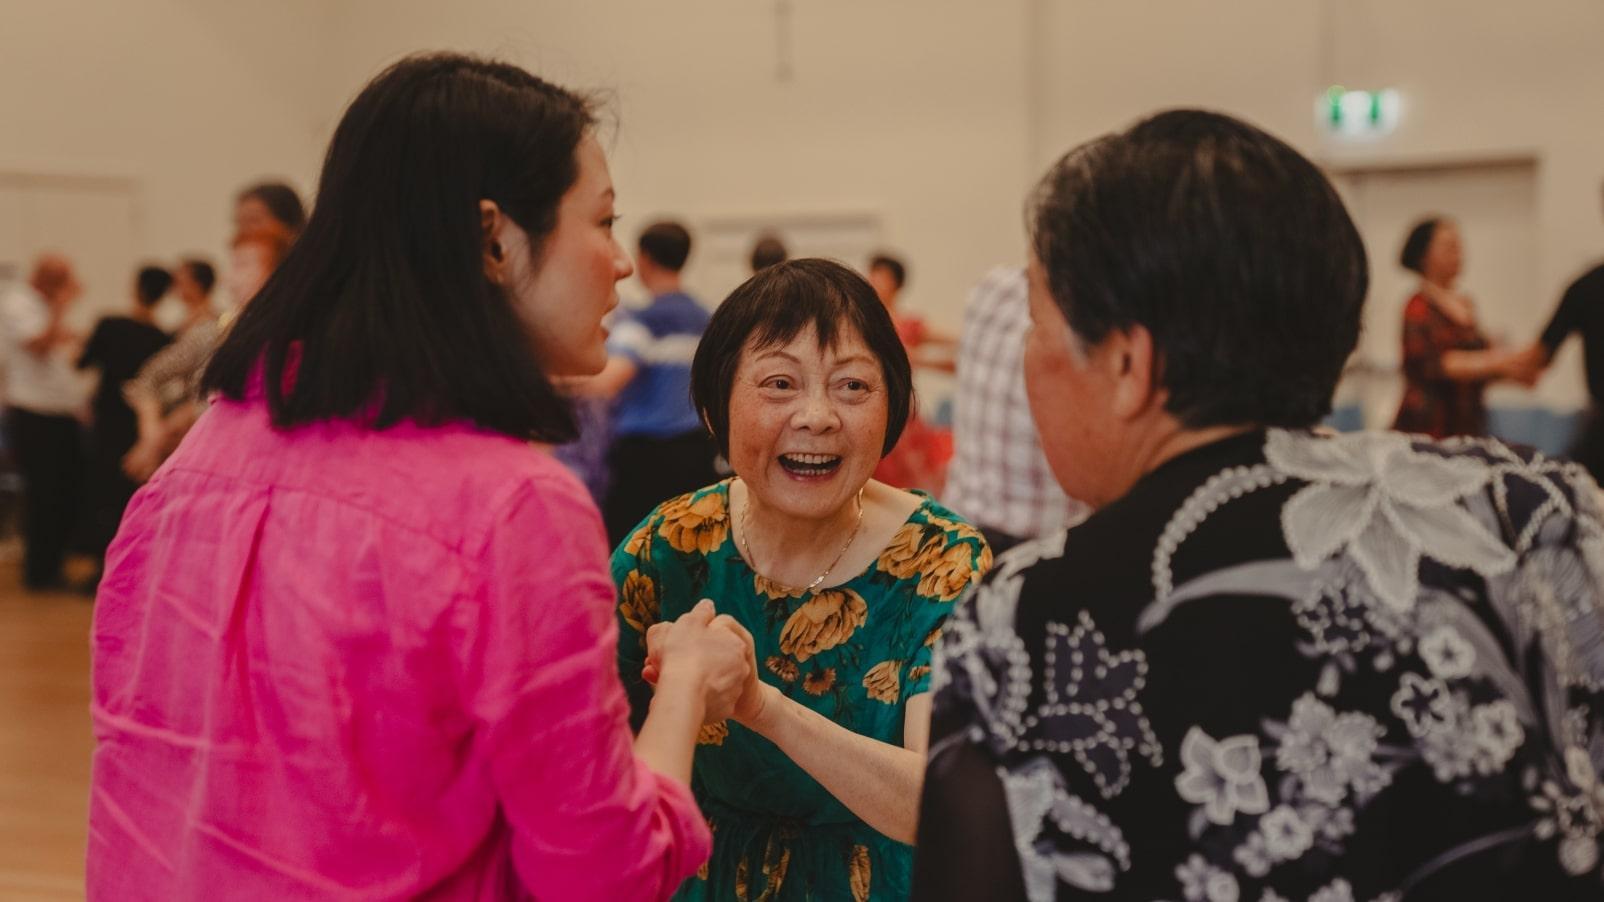 A woman stands smiling in a hall. Two other people hold her hands and talk to her as others gather behind.